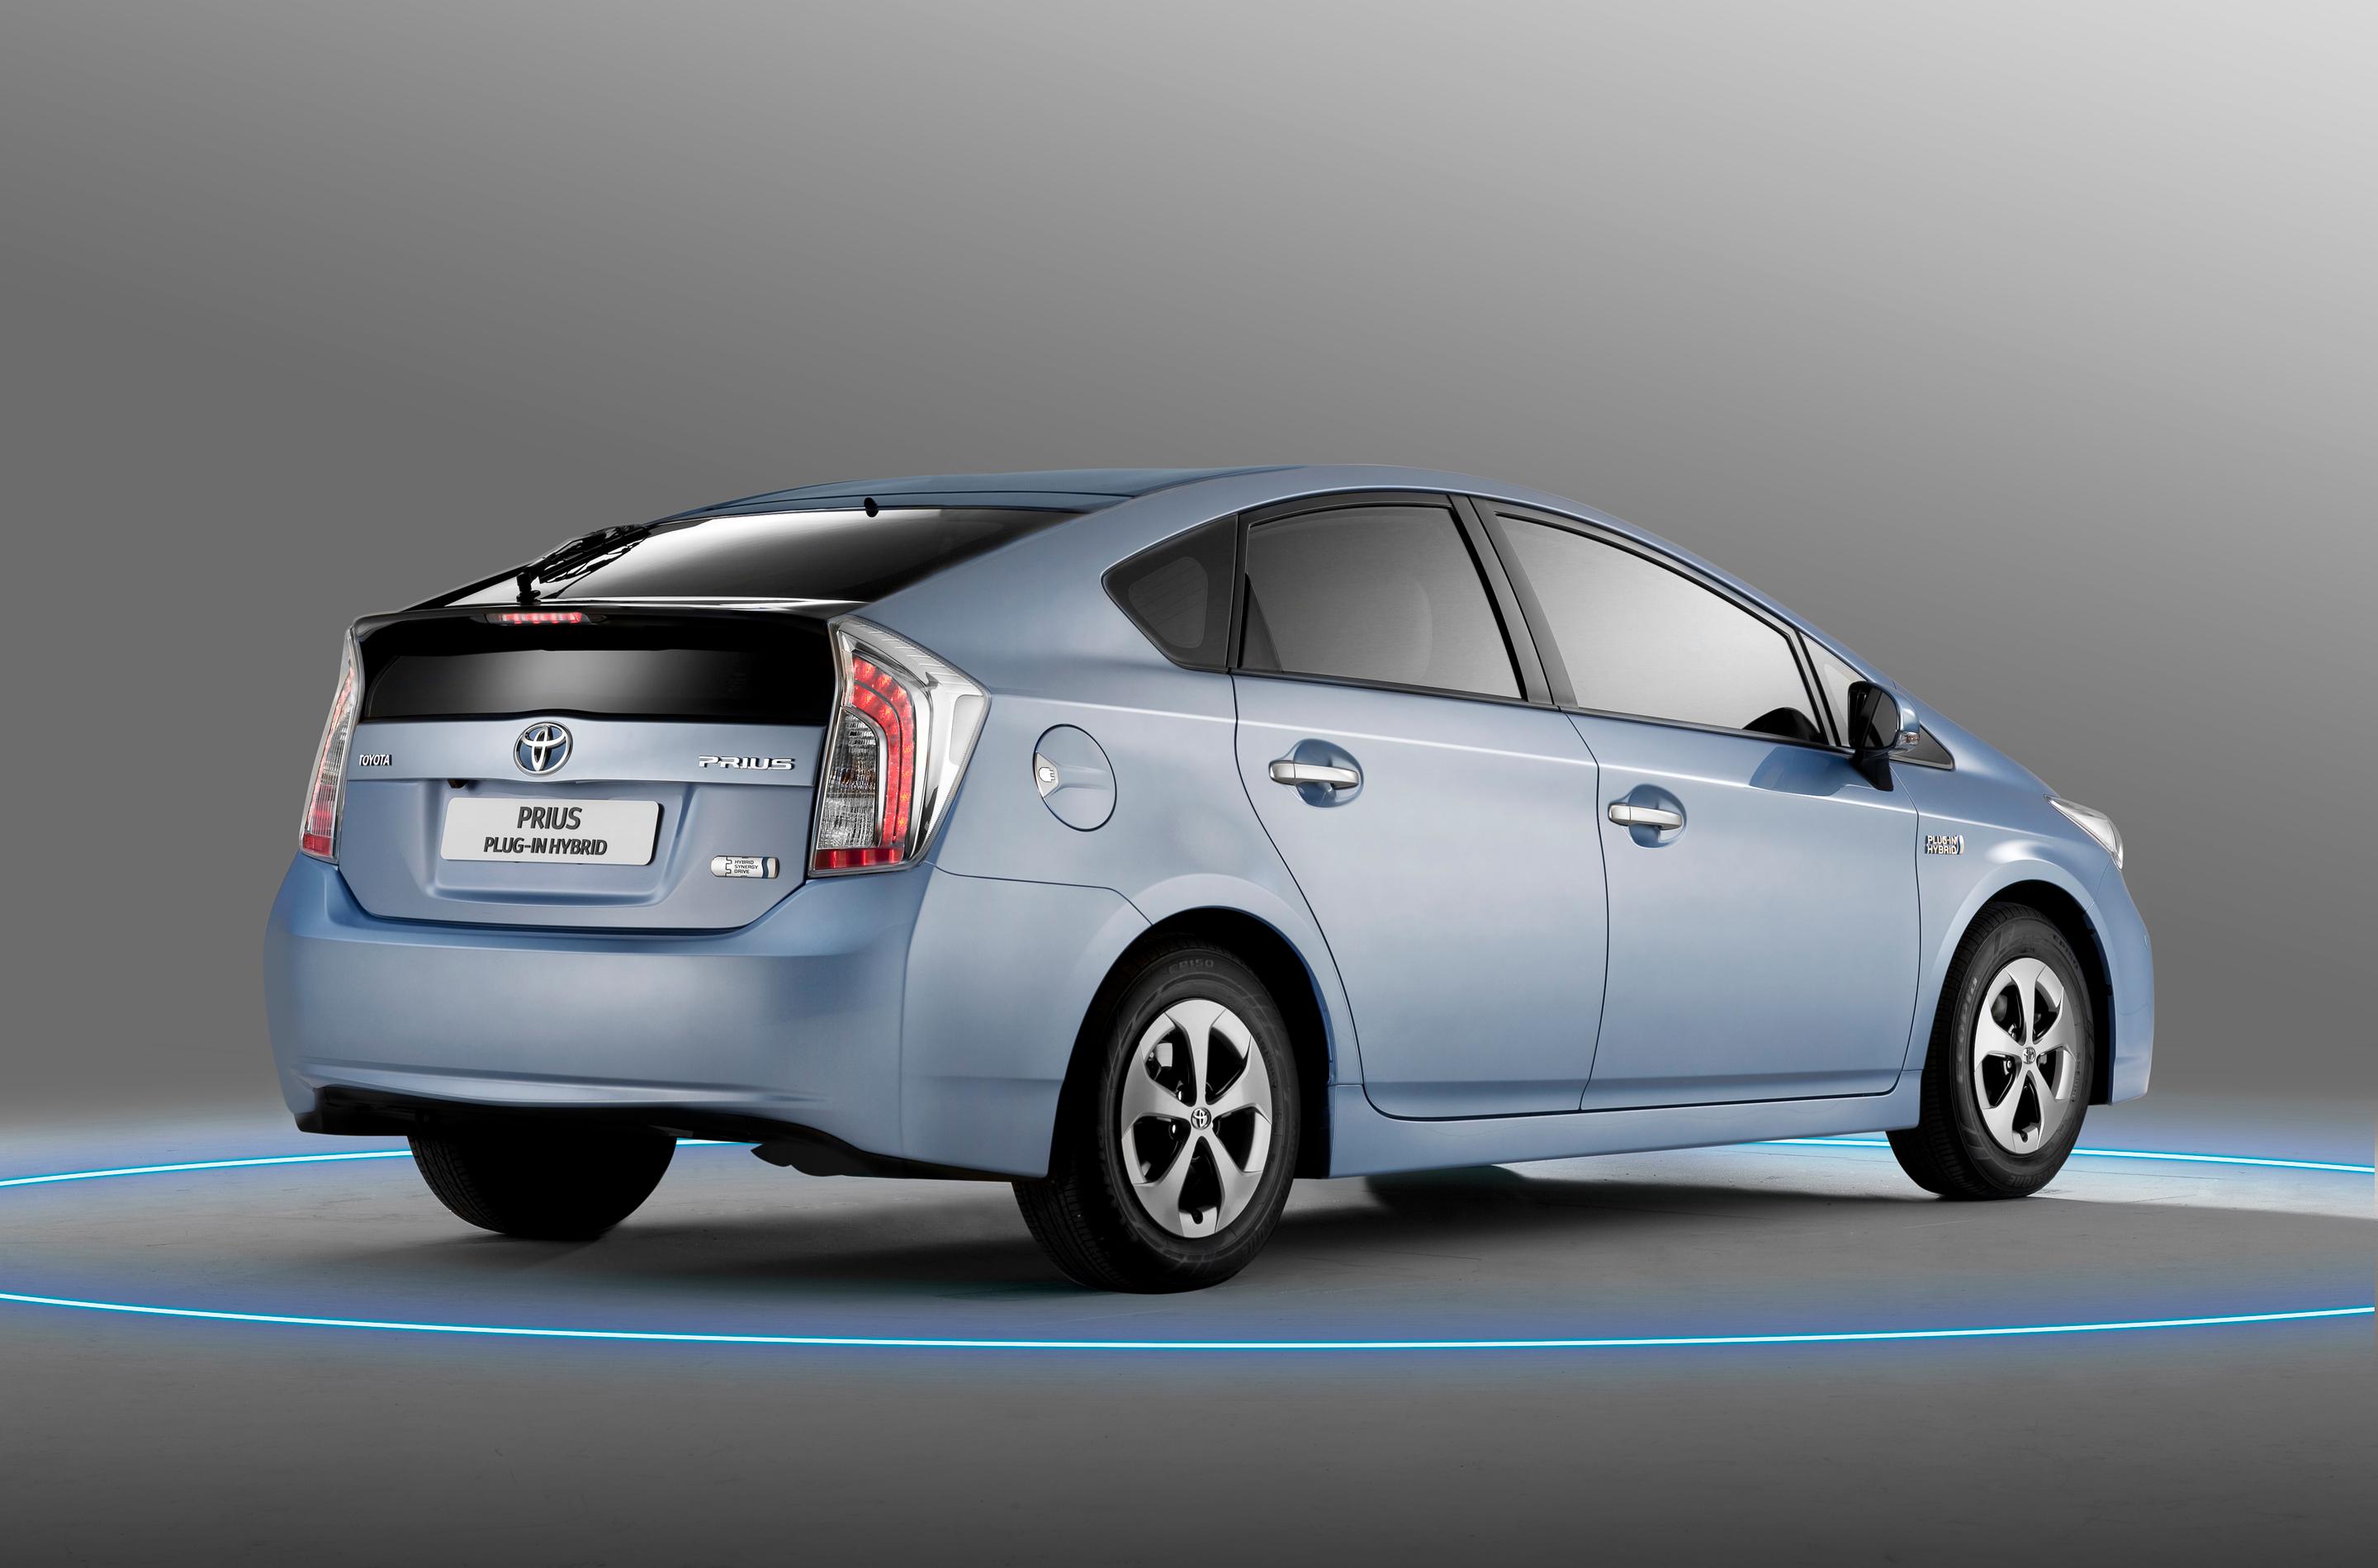 Toyota set to expand Prius platform to include PHEV and seven-seat models